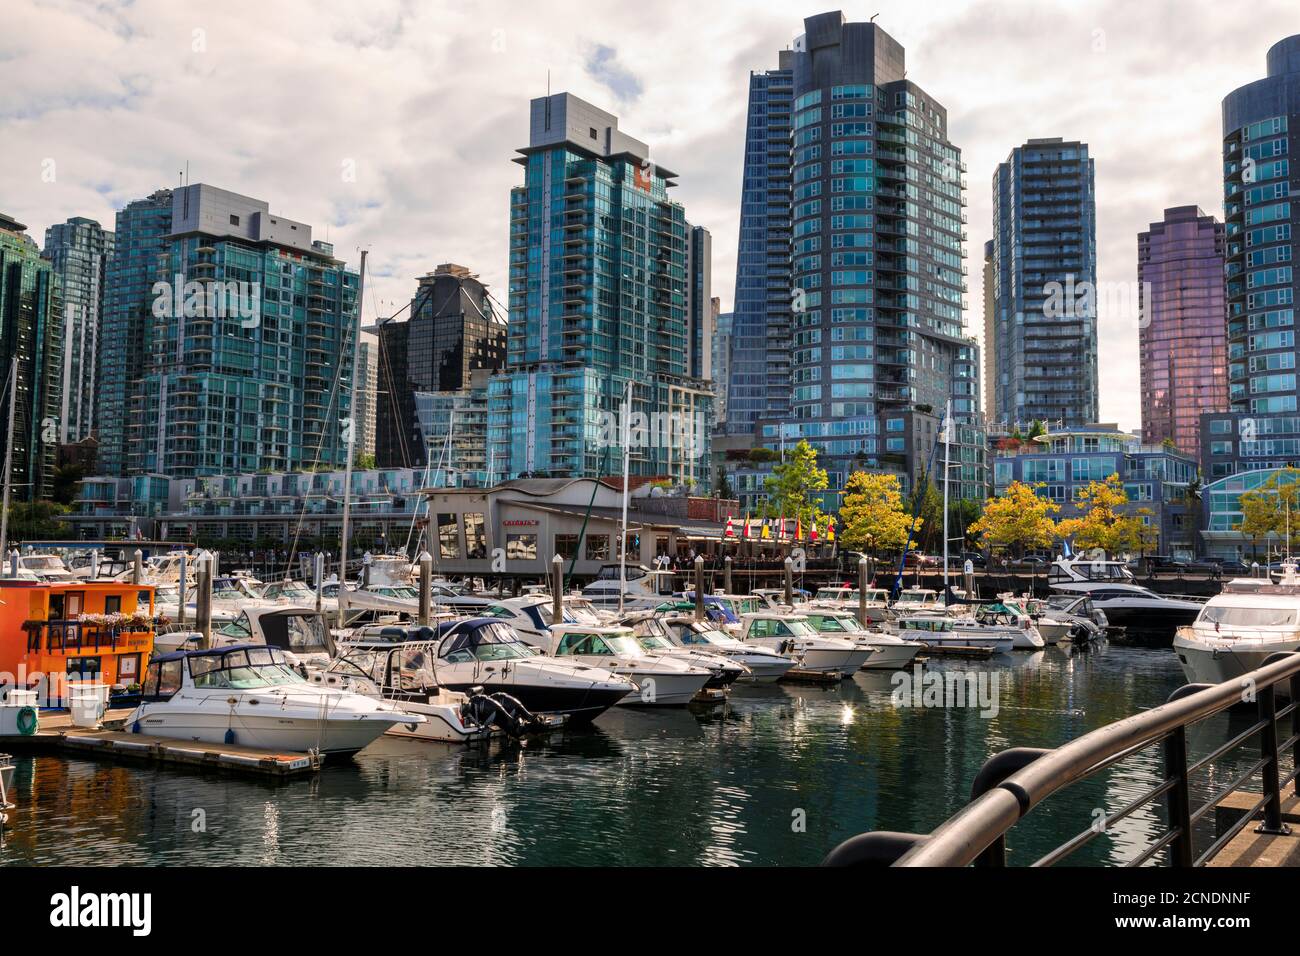 Marina at Coal Harbour, with leisure craft and house boats, city skyline, Vancouver, British Columbia, Canada Stock Photo